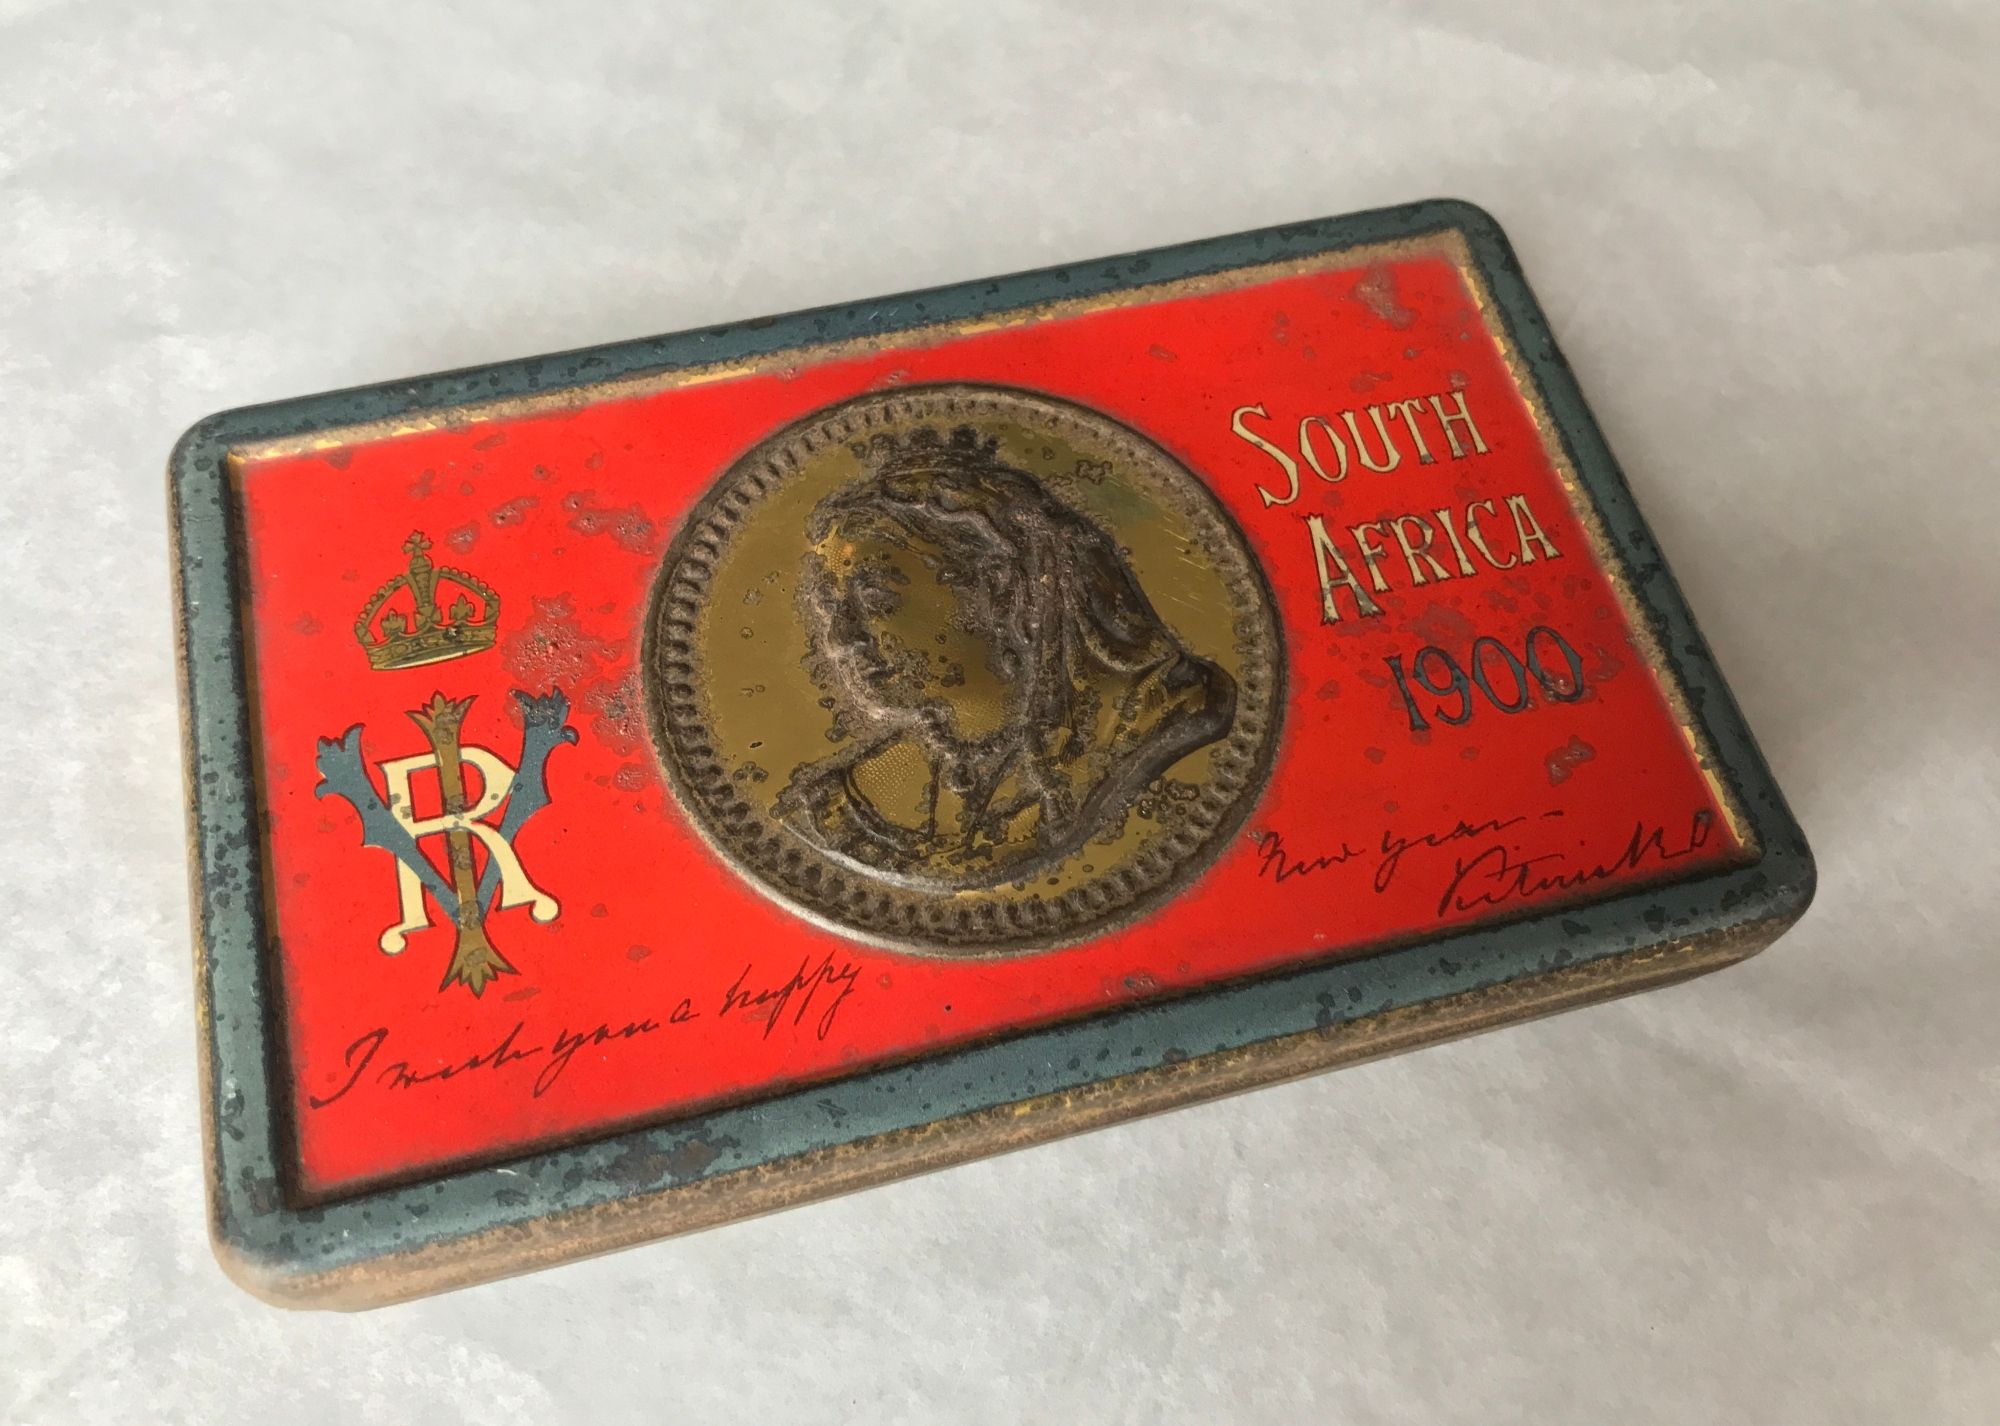 Queen Victoria’s 121-year-old chocolate found in National Trust attic